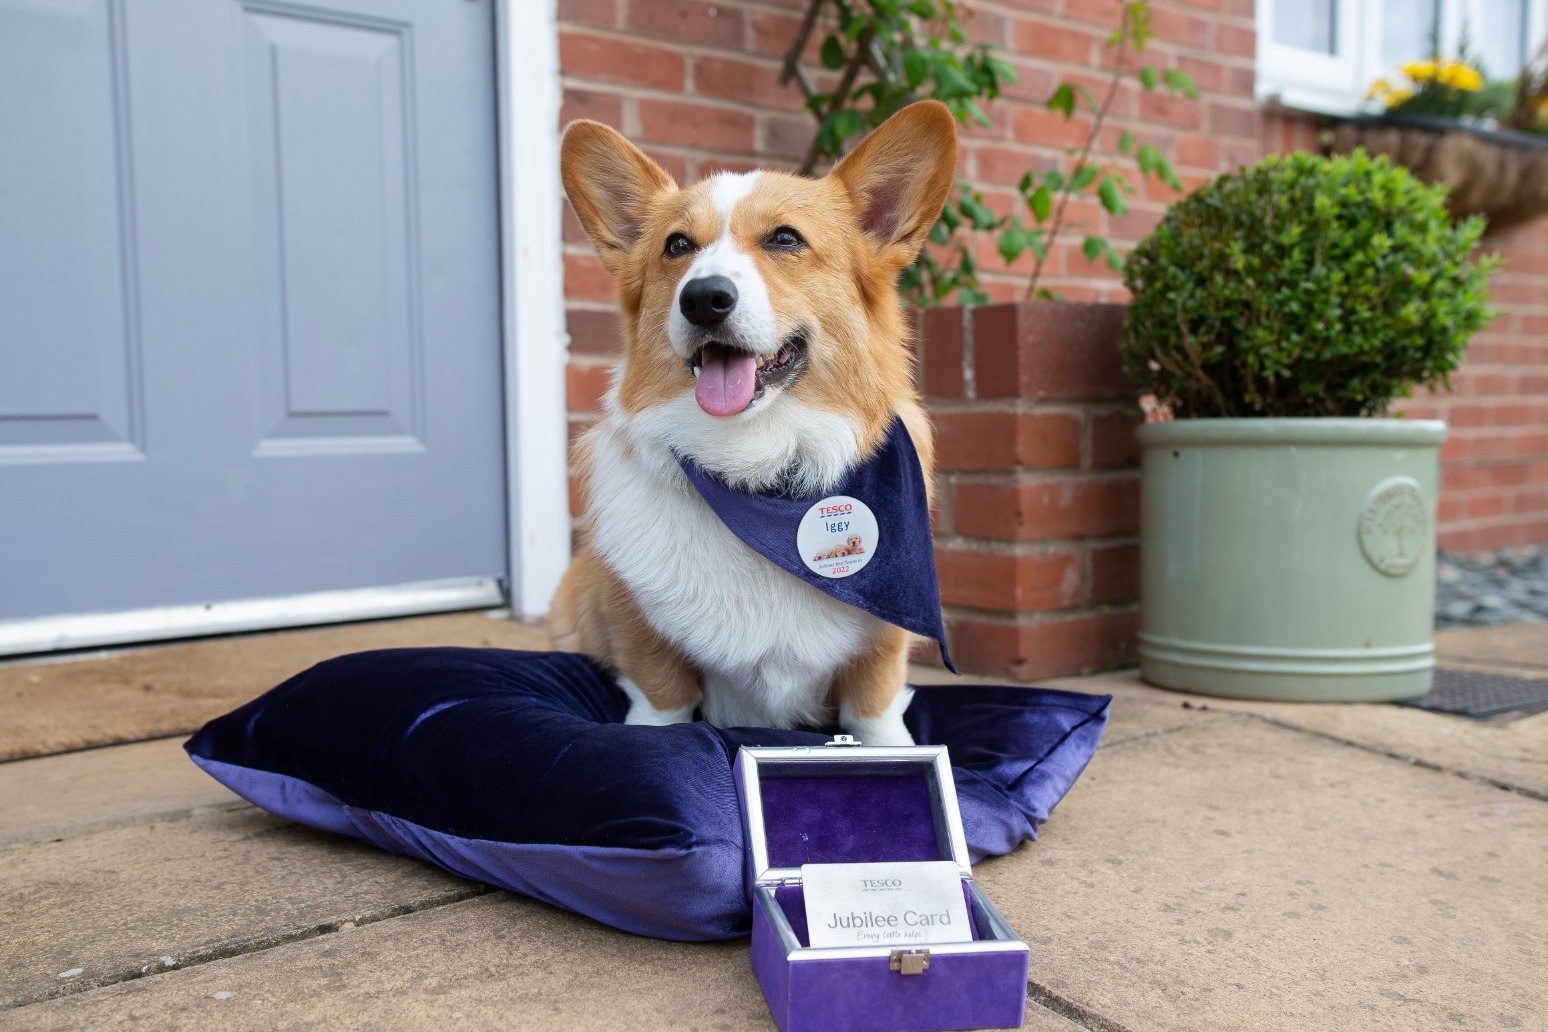 Queen’s favourite corgi breed now ‘beloved’ nationwide, says The Kennel Club 